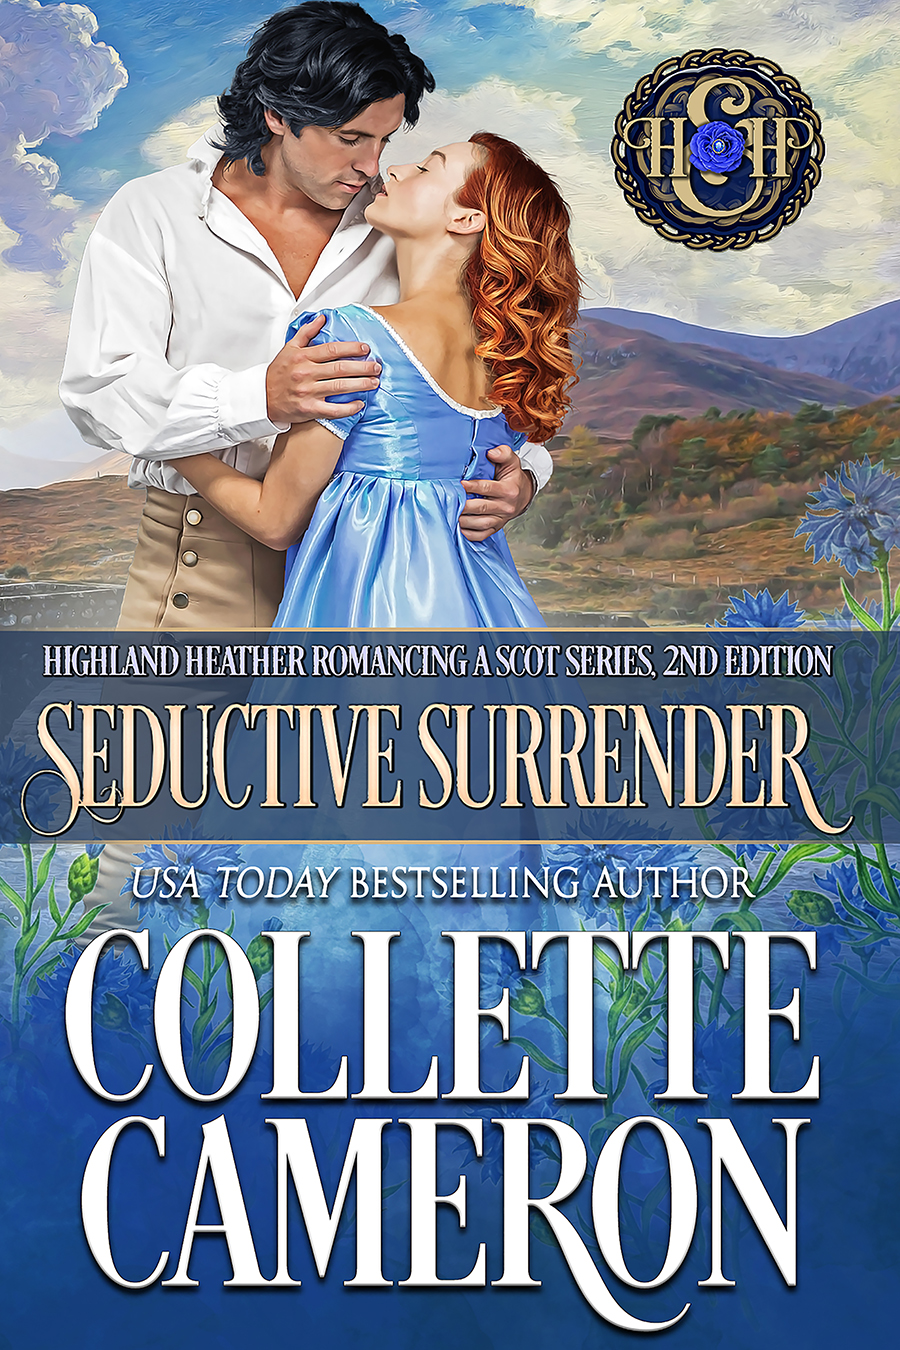 Seductive Surrender, Highland Heather Romancing a Scot Series, USA Today Bestselling Author Collette Cameron, Collette Cameron historical romances, Collette Cameron Regency romances, Collette Cameron romance novels, Collette Cameron Scottish historical romance books, Blue Rose Romance, Bestselling historical romance authors, historical romance novels, Regency romance novels, Highlander romance books, Scottish romance novels, romance novel covers, Bestselling romance novels, Bestselling Regency romances, Bestselling Scottish Romances, Bestselling Highlander romances, Victorian Romances, lords and ladies romance novels, Regency England Dukes romance books, aristocrats and royalty, happily ever after novels, love stories, wallflowers, rakes and rogues, award-winning books, Award-winning author, historical romance audio books, collettecameron.com, The Regency Rose Newsletter, Sweet-to-Spicy Timeless Romance, historical romance meme, romance meme, historical regency romance 